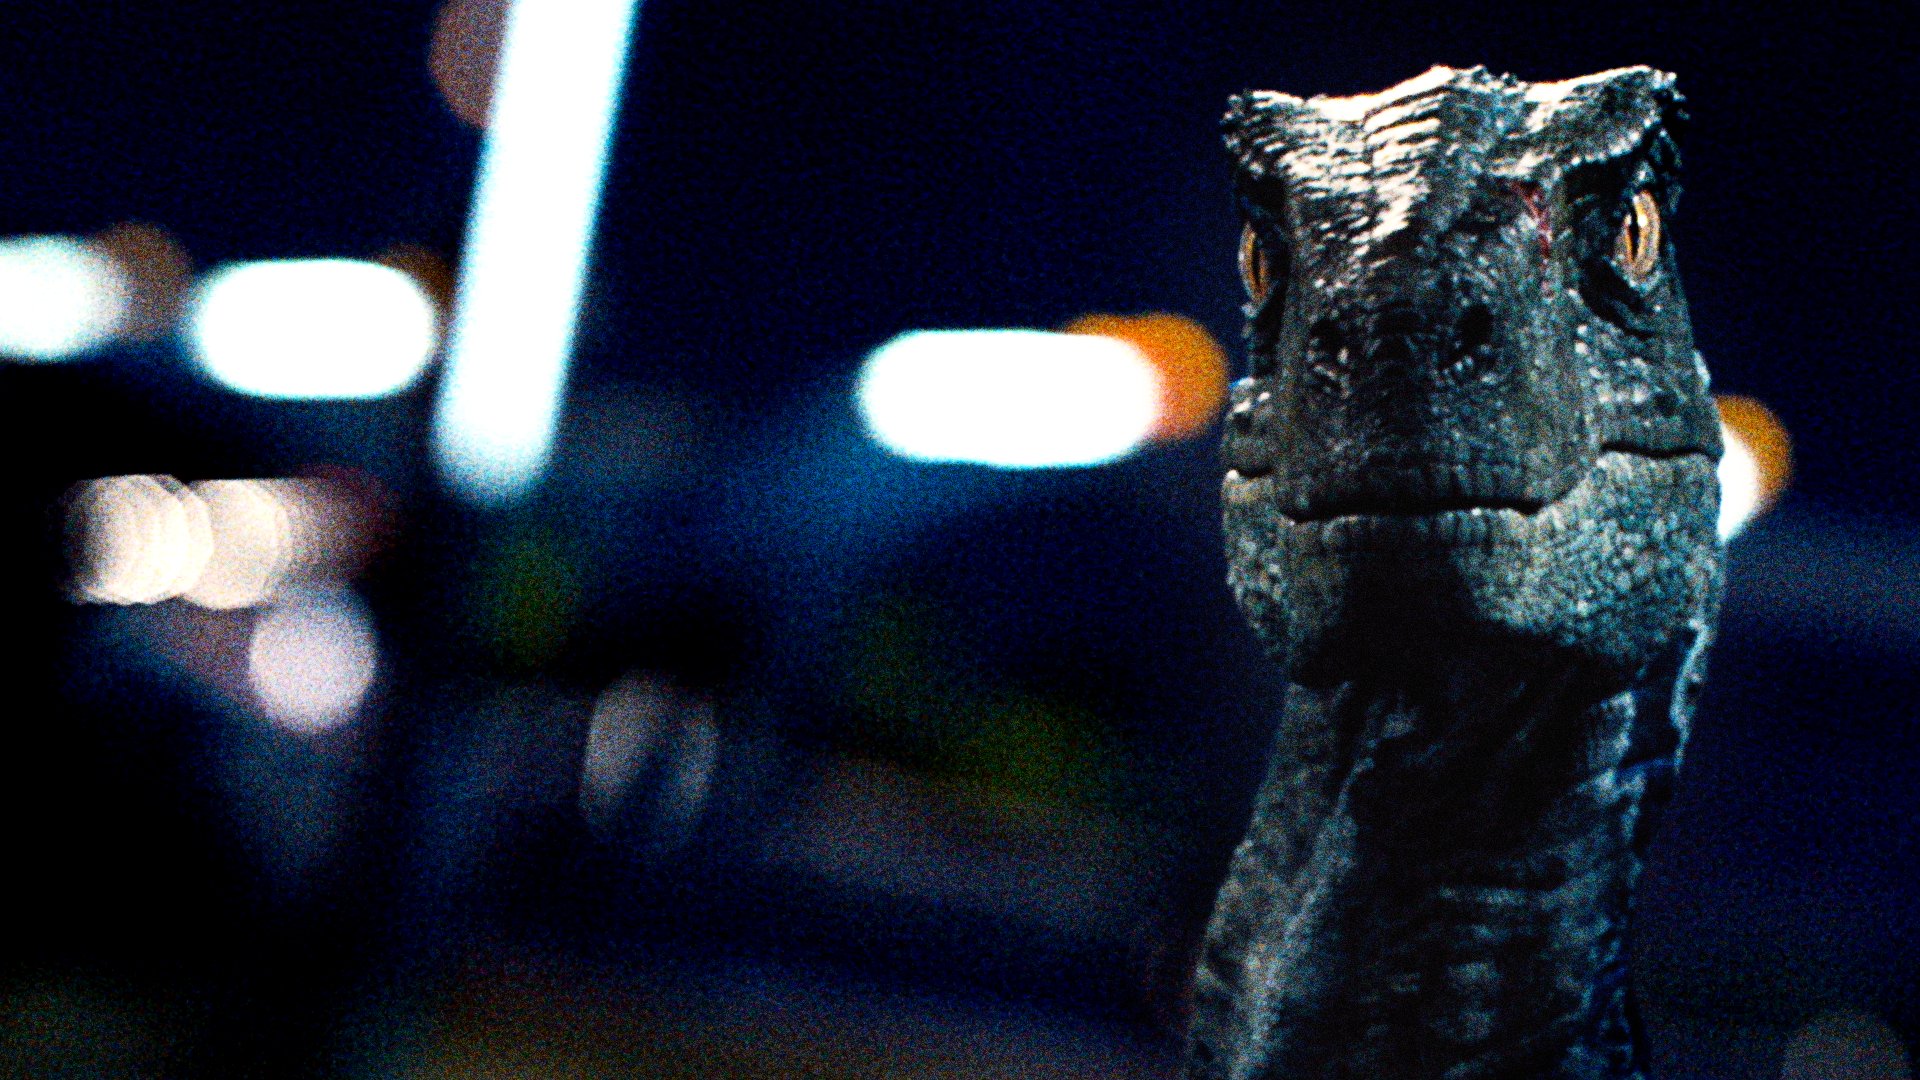 Jurassic World Bring Jurassicworld To Your Video Calls With One Of These Backgrounds